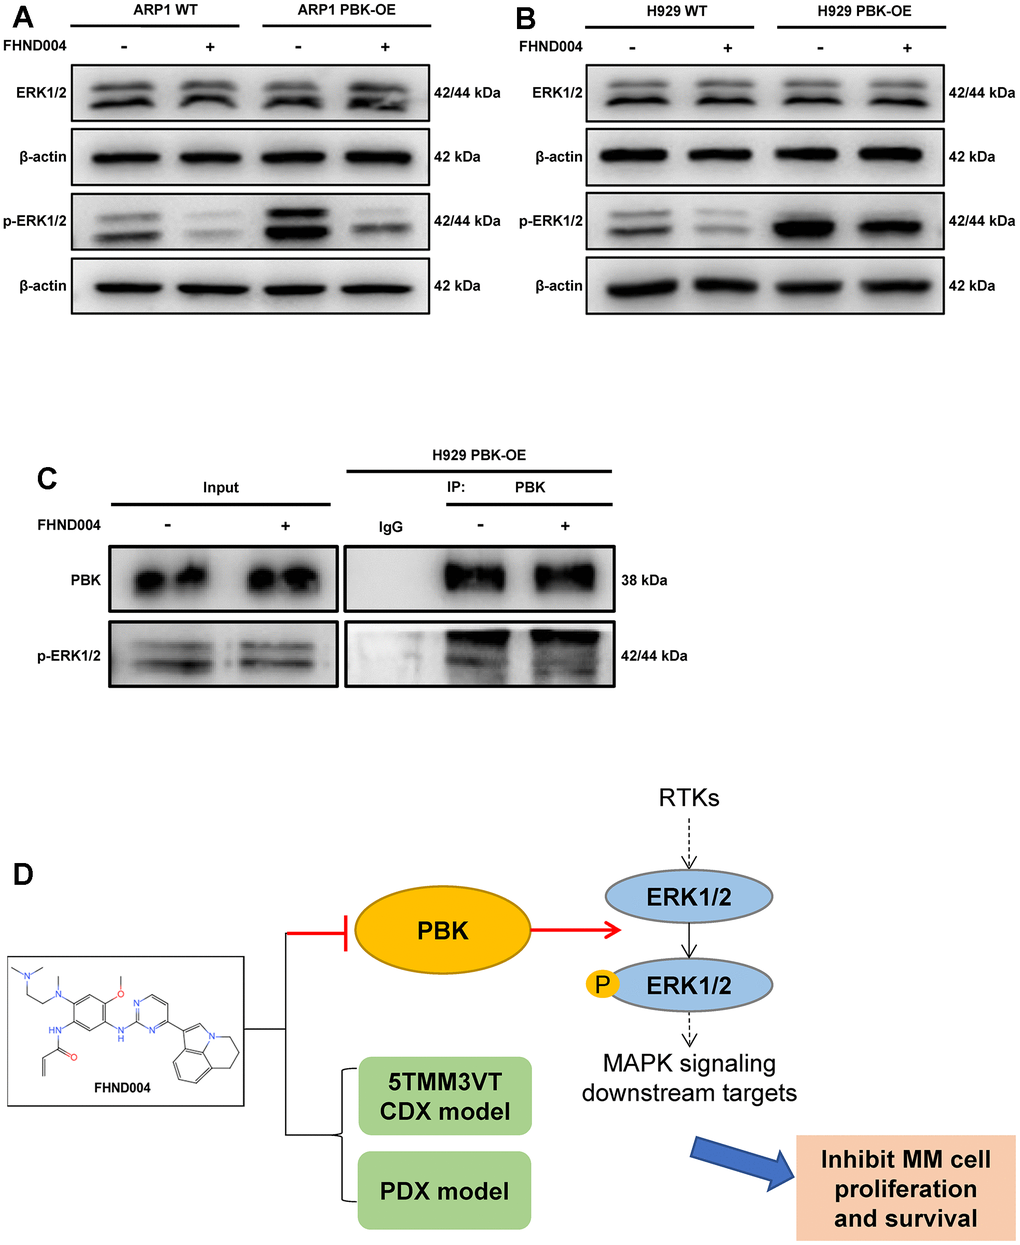 FHND004 targets PBK leading to the inhibition of ERK1/2 phosphorylation in the MAPK pathway. (A, B) WB validated the protein expression profiles of ERK1/2 and p-ERK1/2 in PBK-WT and PBK-OE cells with or without treatment of FHND004 (4 μM) (A: ARP1, B: H929). n = 3. (C) Co-IP assay revealed that FHND004 (4 μM) interfered with the interaction between PBK and p-ERK1/2 in H929 PBK-OE cells. (D) Schematic diagram of the mechanism of FHND004 targeting PBK in MM.